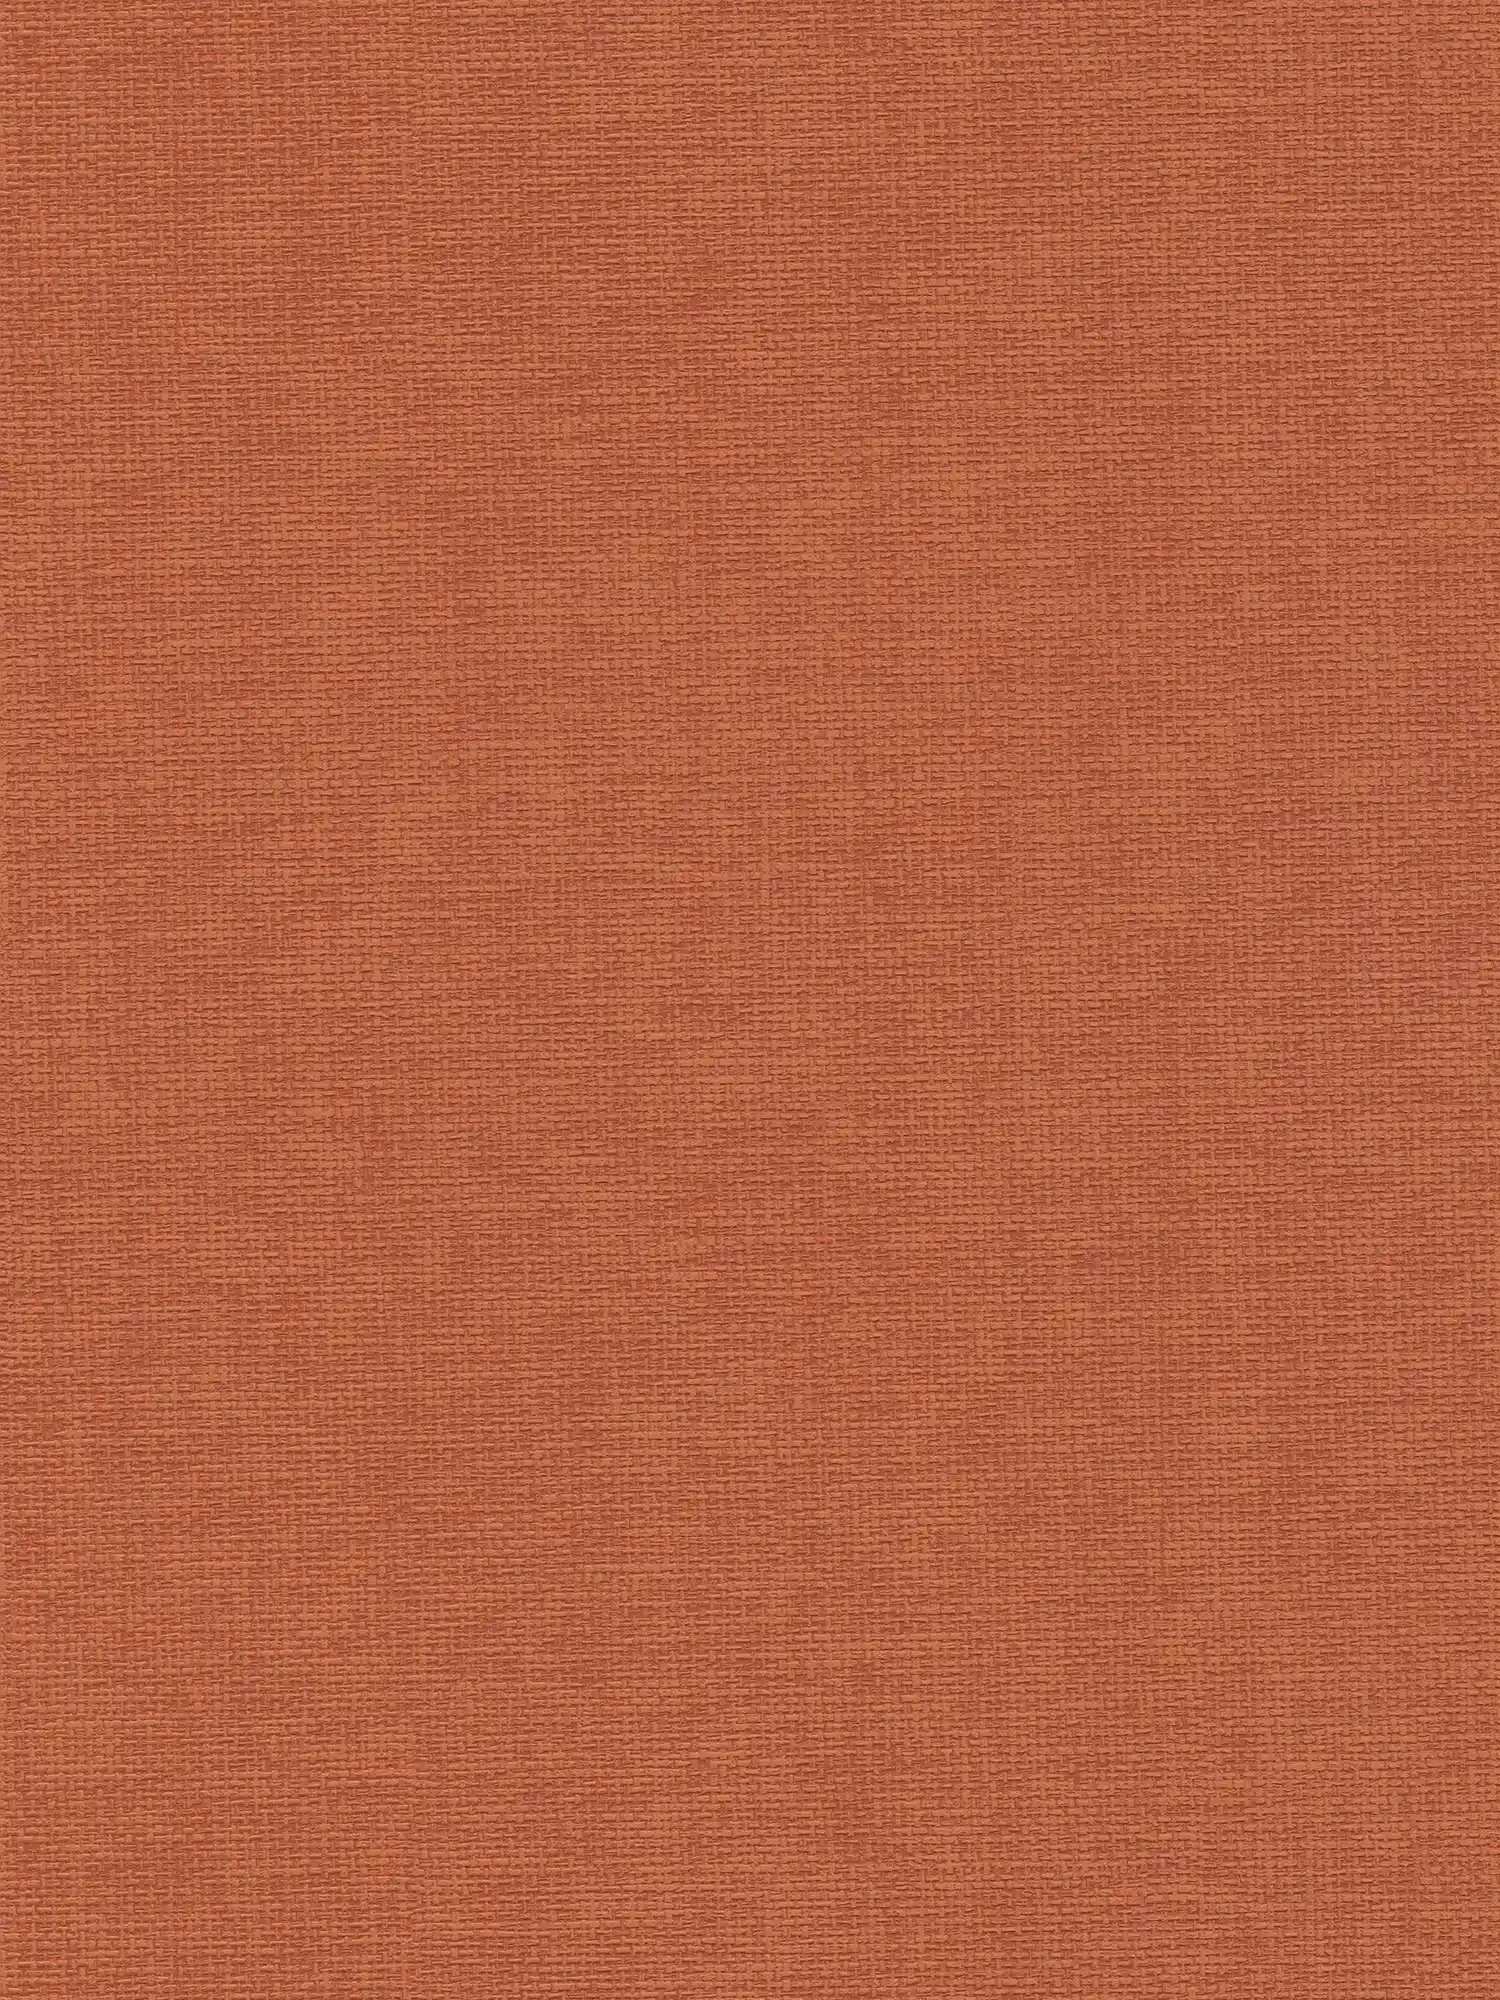 Orange red wallpaper with textile texture - red
